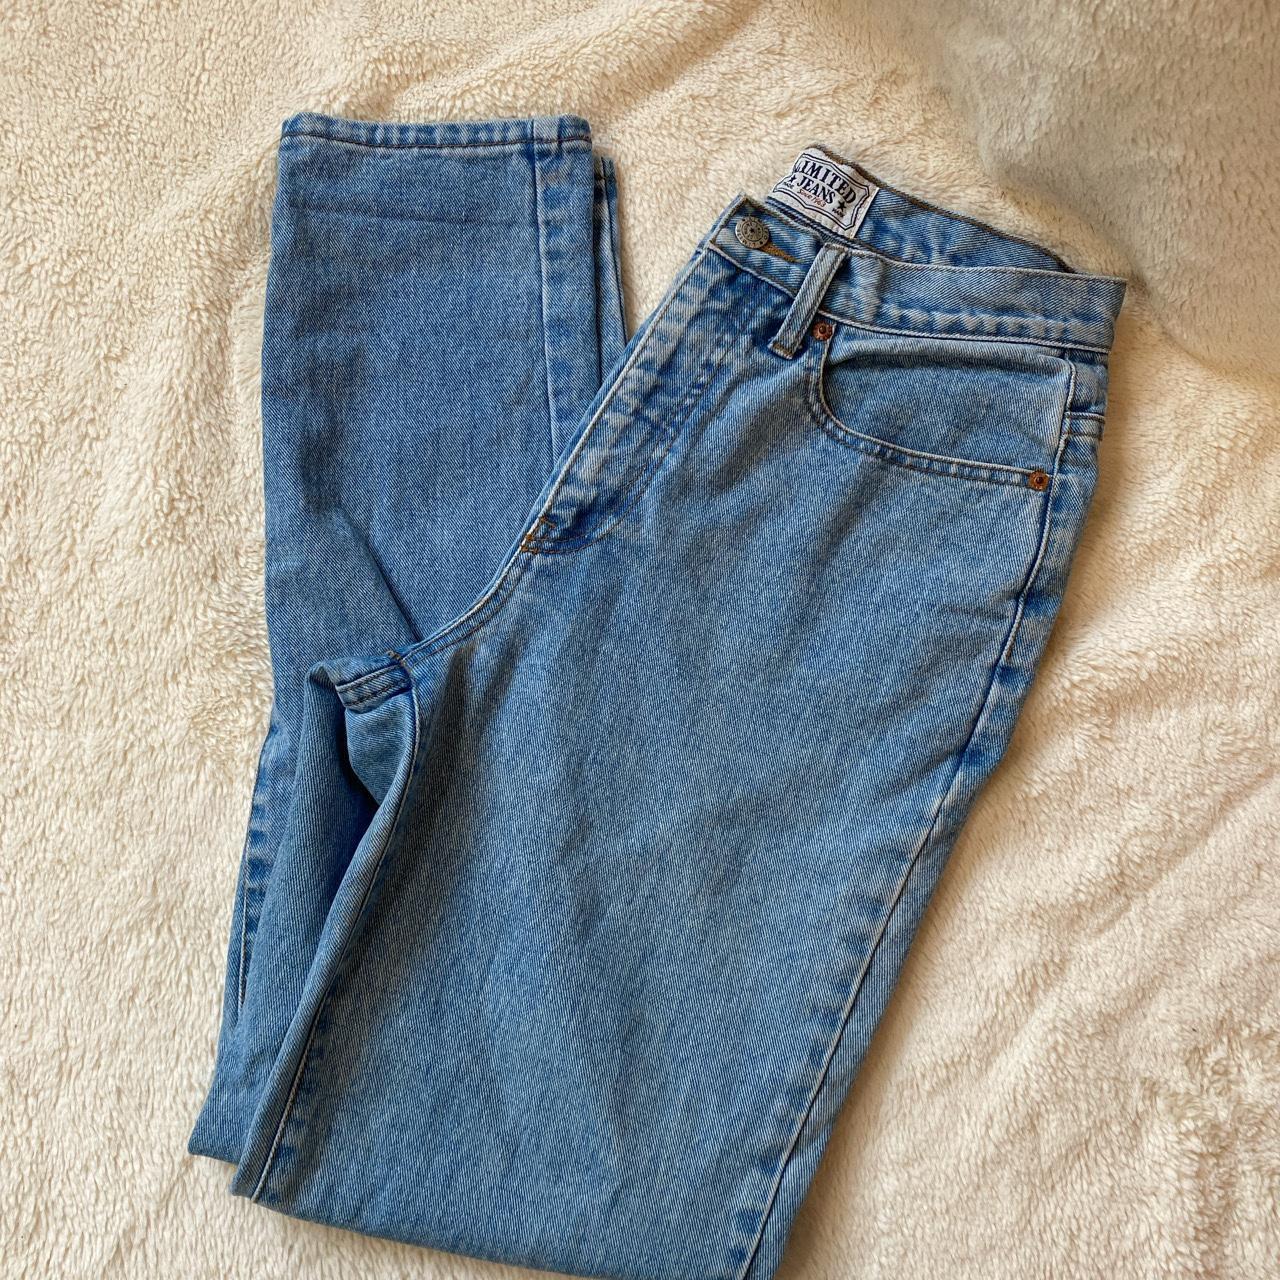 Women's Blue and Navy Jeans (3)